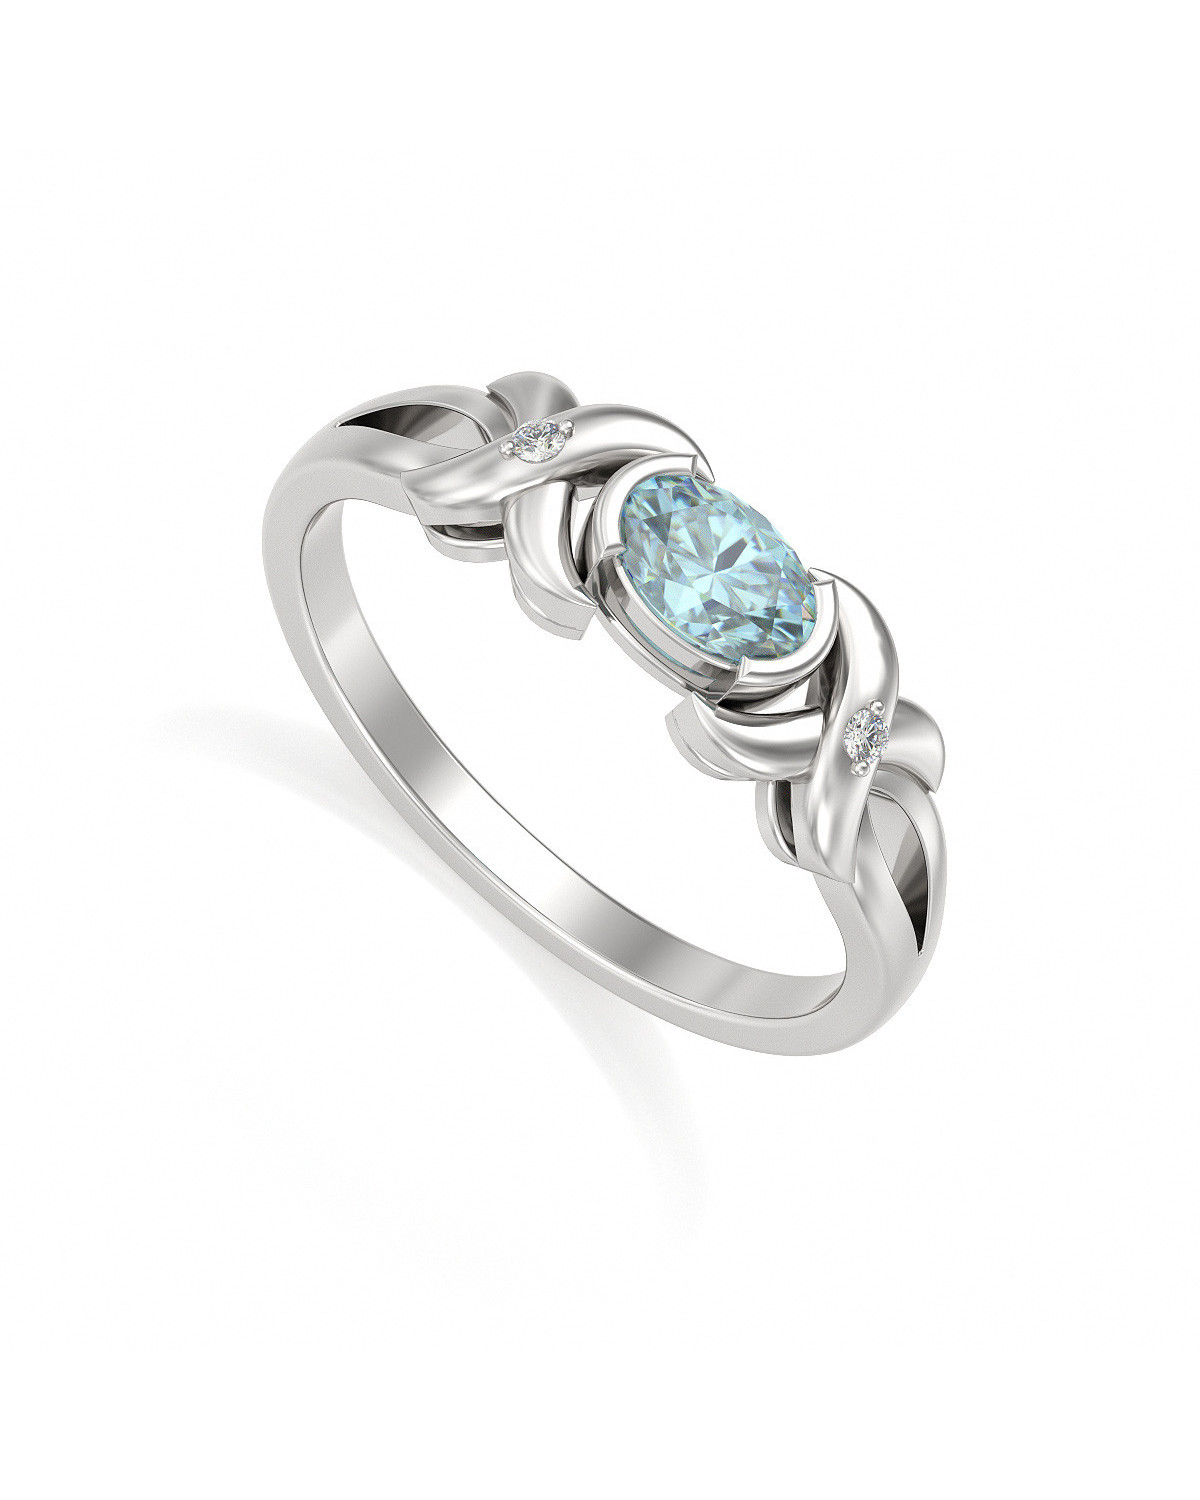 Aquamarine and Diamond Ring on Sterling Silver 925